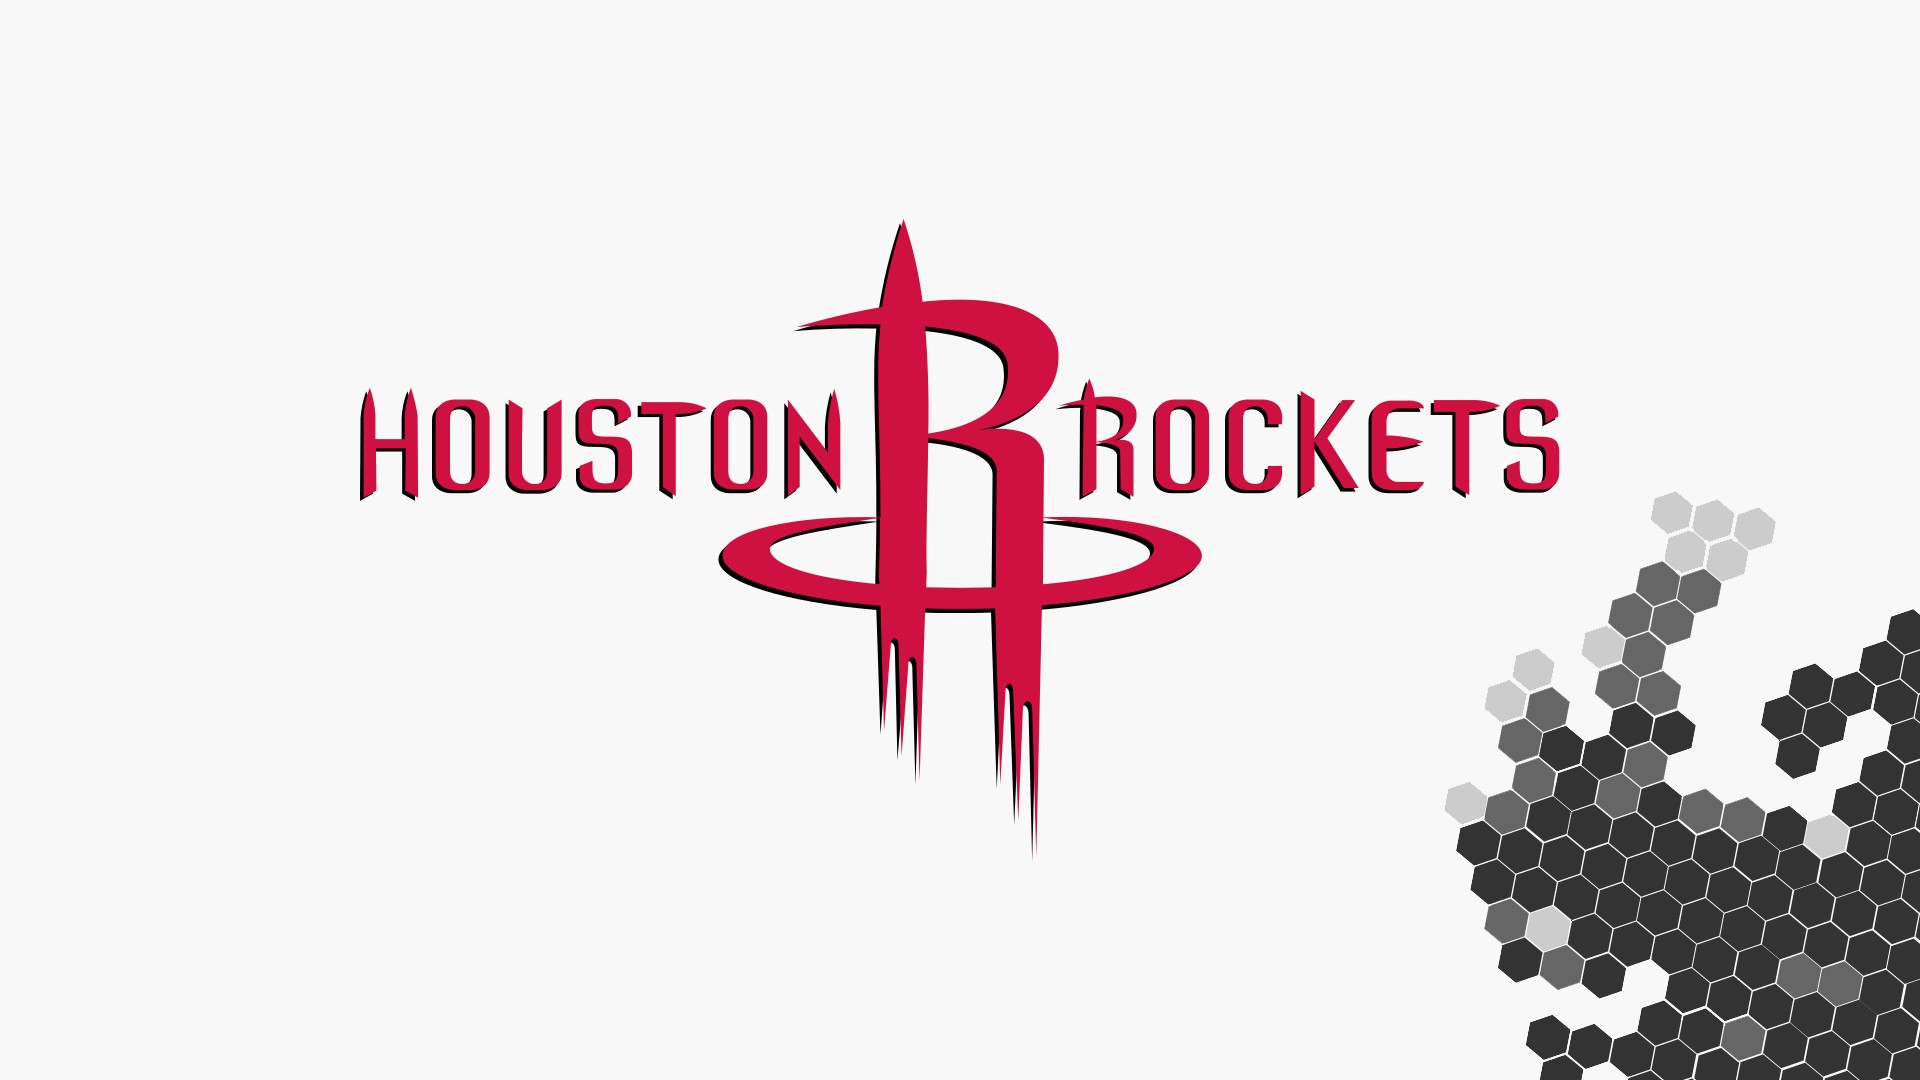 Houston Rockets HD Wallpapers with image dimensions 1920x1080 pixel. You can make this wallpaper for your Desktop Computer Backgrounds, Windows or Mac Screensavers, iPhone Lock screen, Tablet or Android and another Mobile Phone device